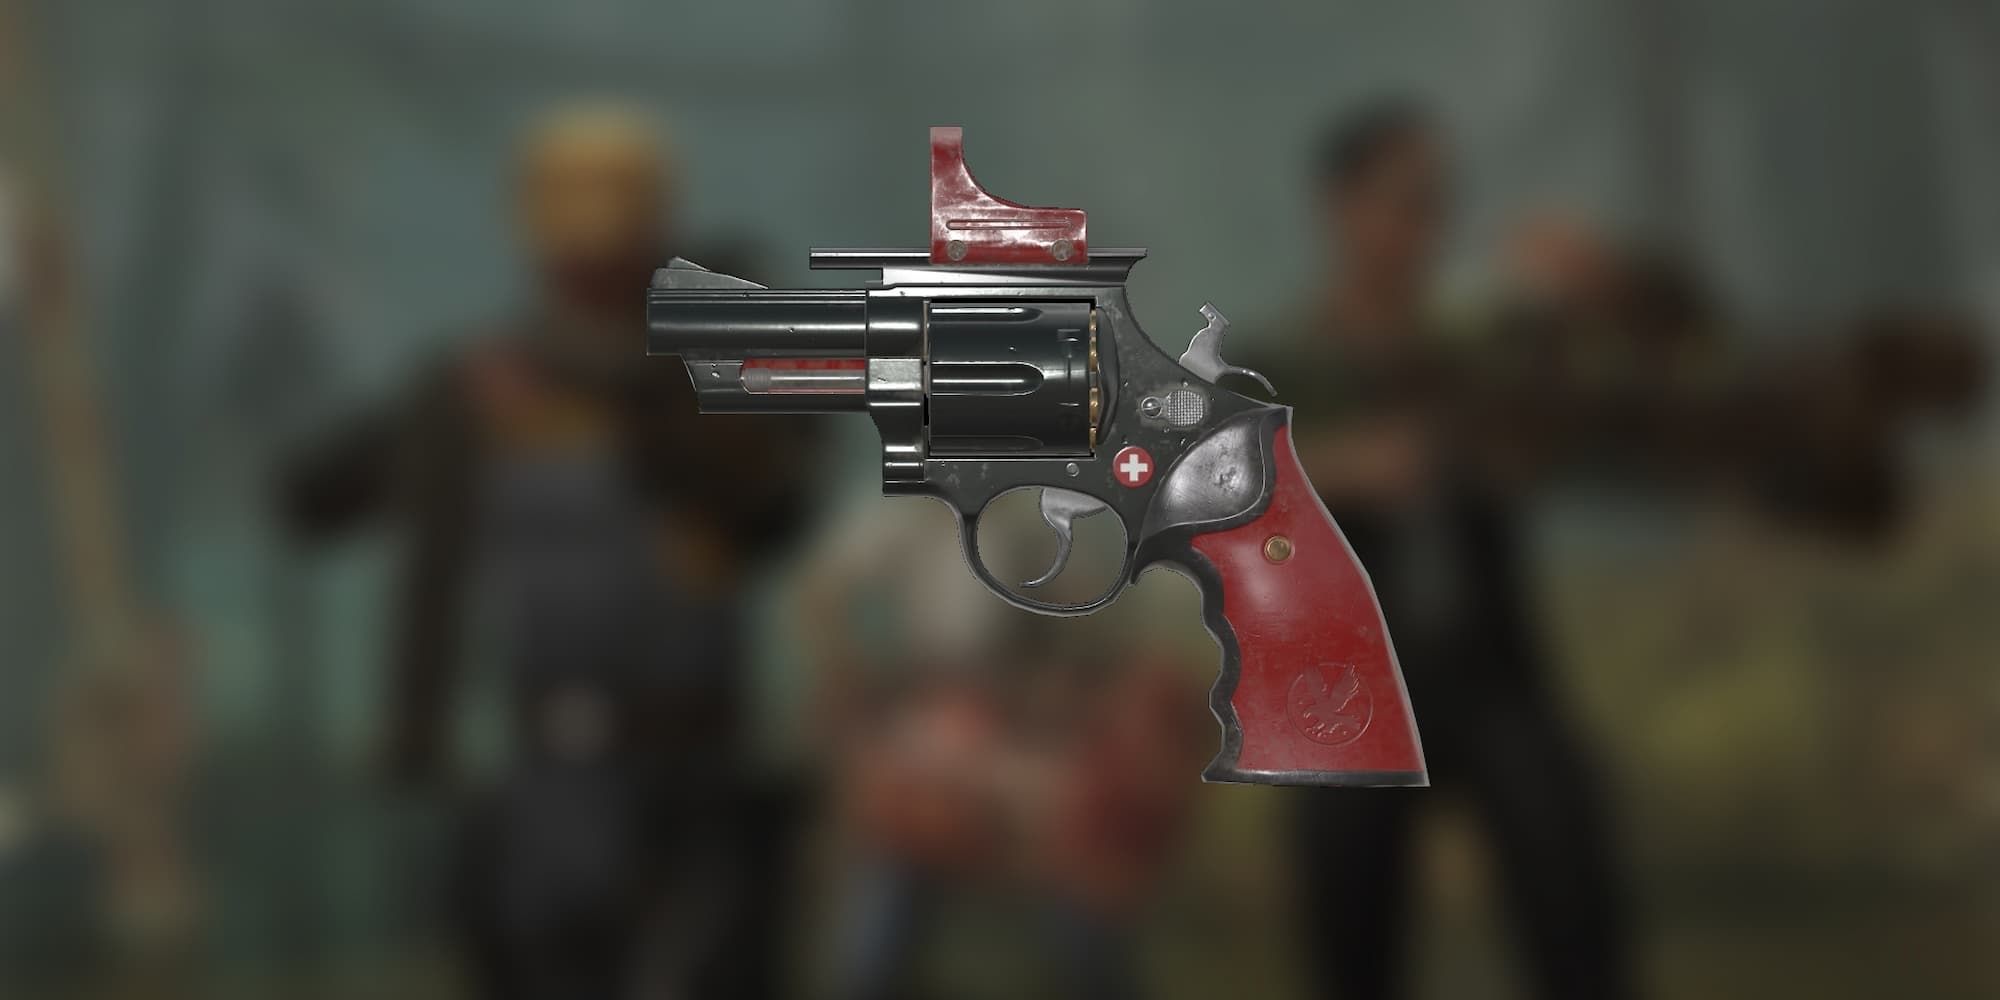 The Medical Malpractice pistol in Fallout 76